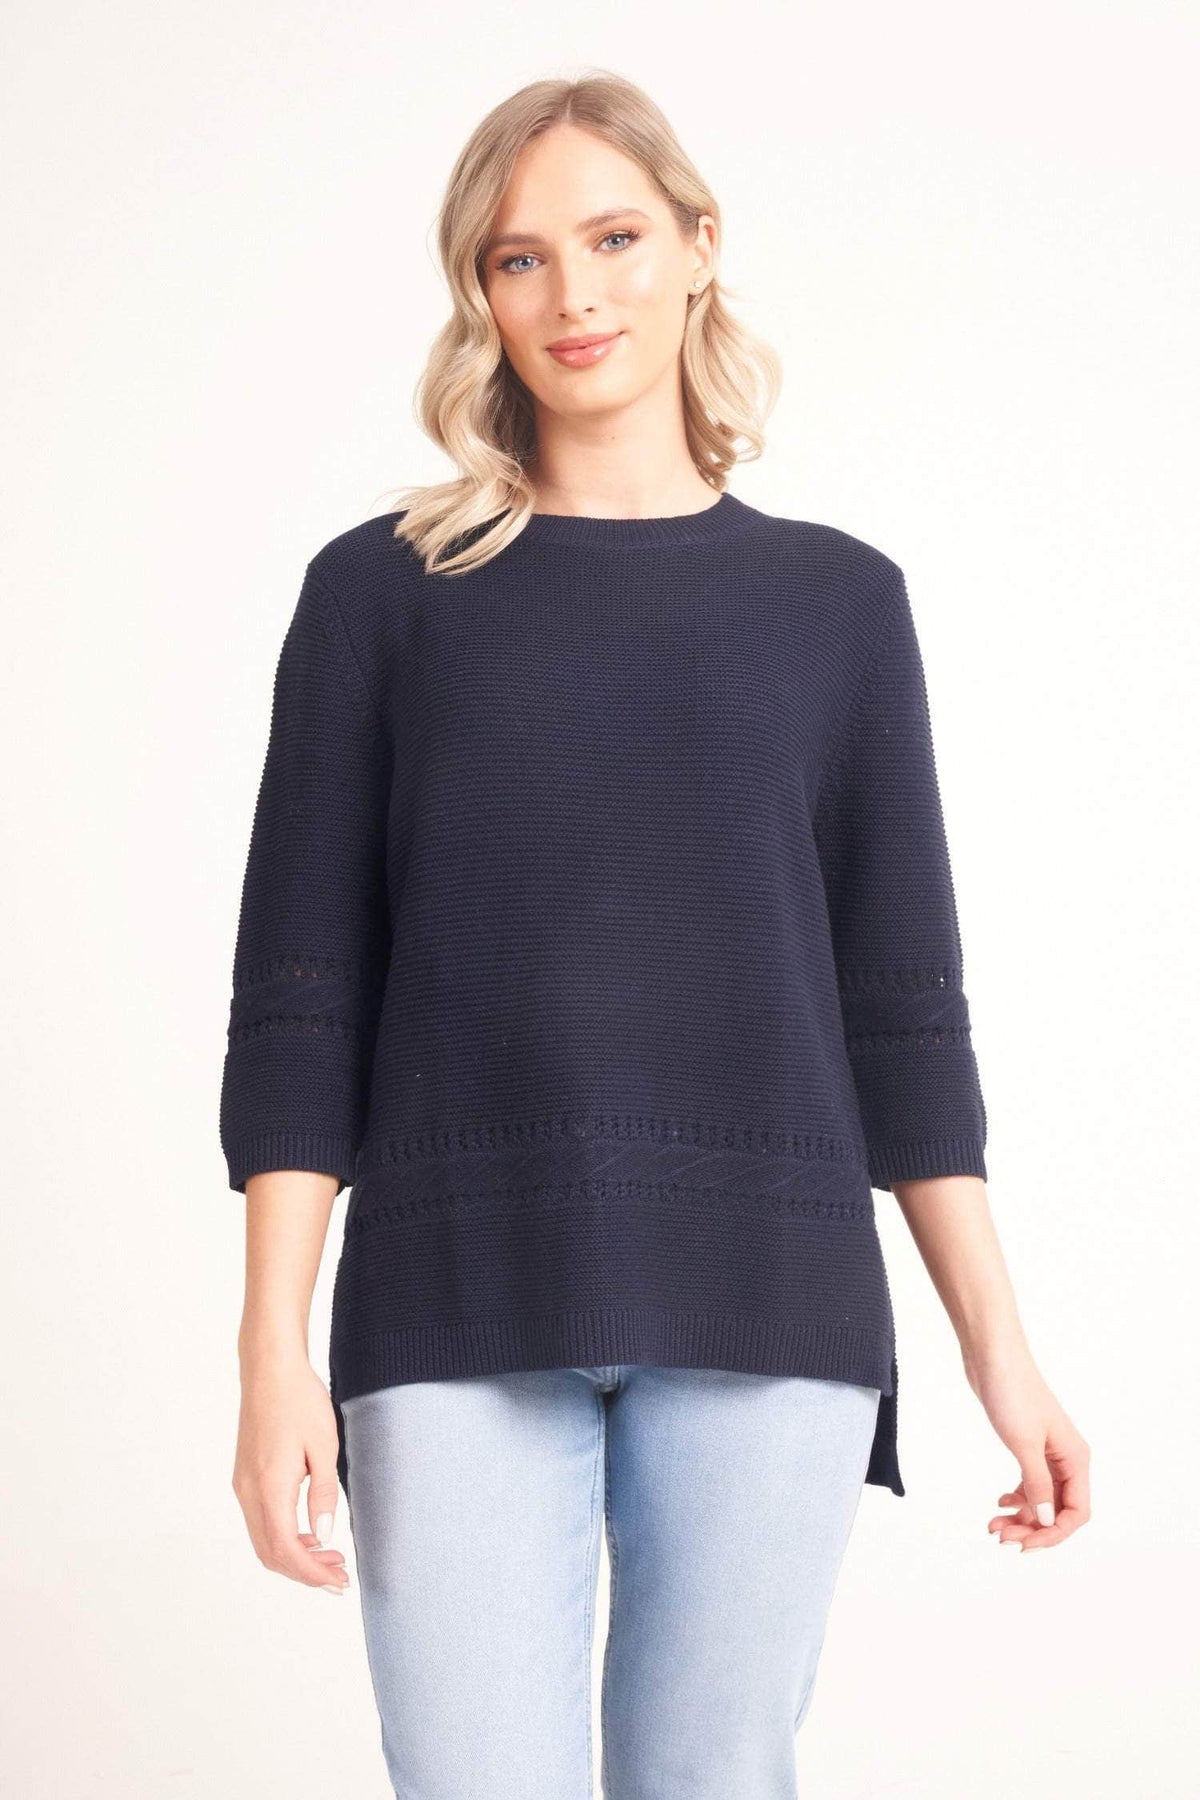 3G Jumper Navy / S Box Cut Jumper with Necklace